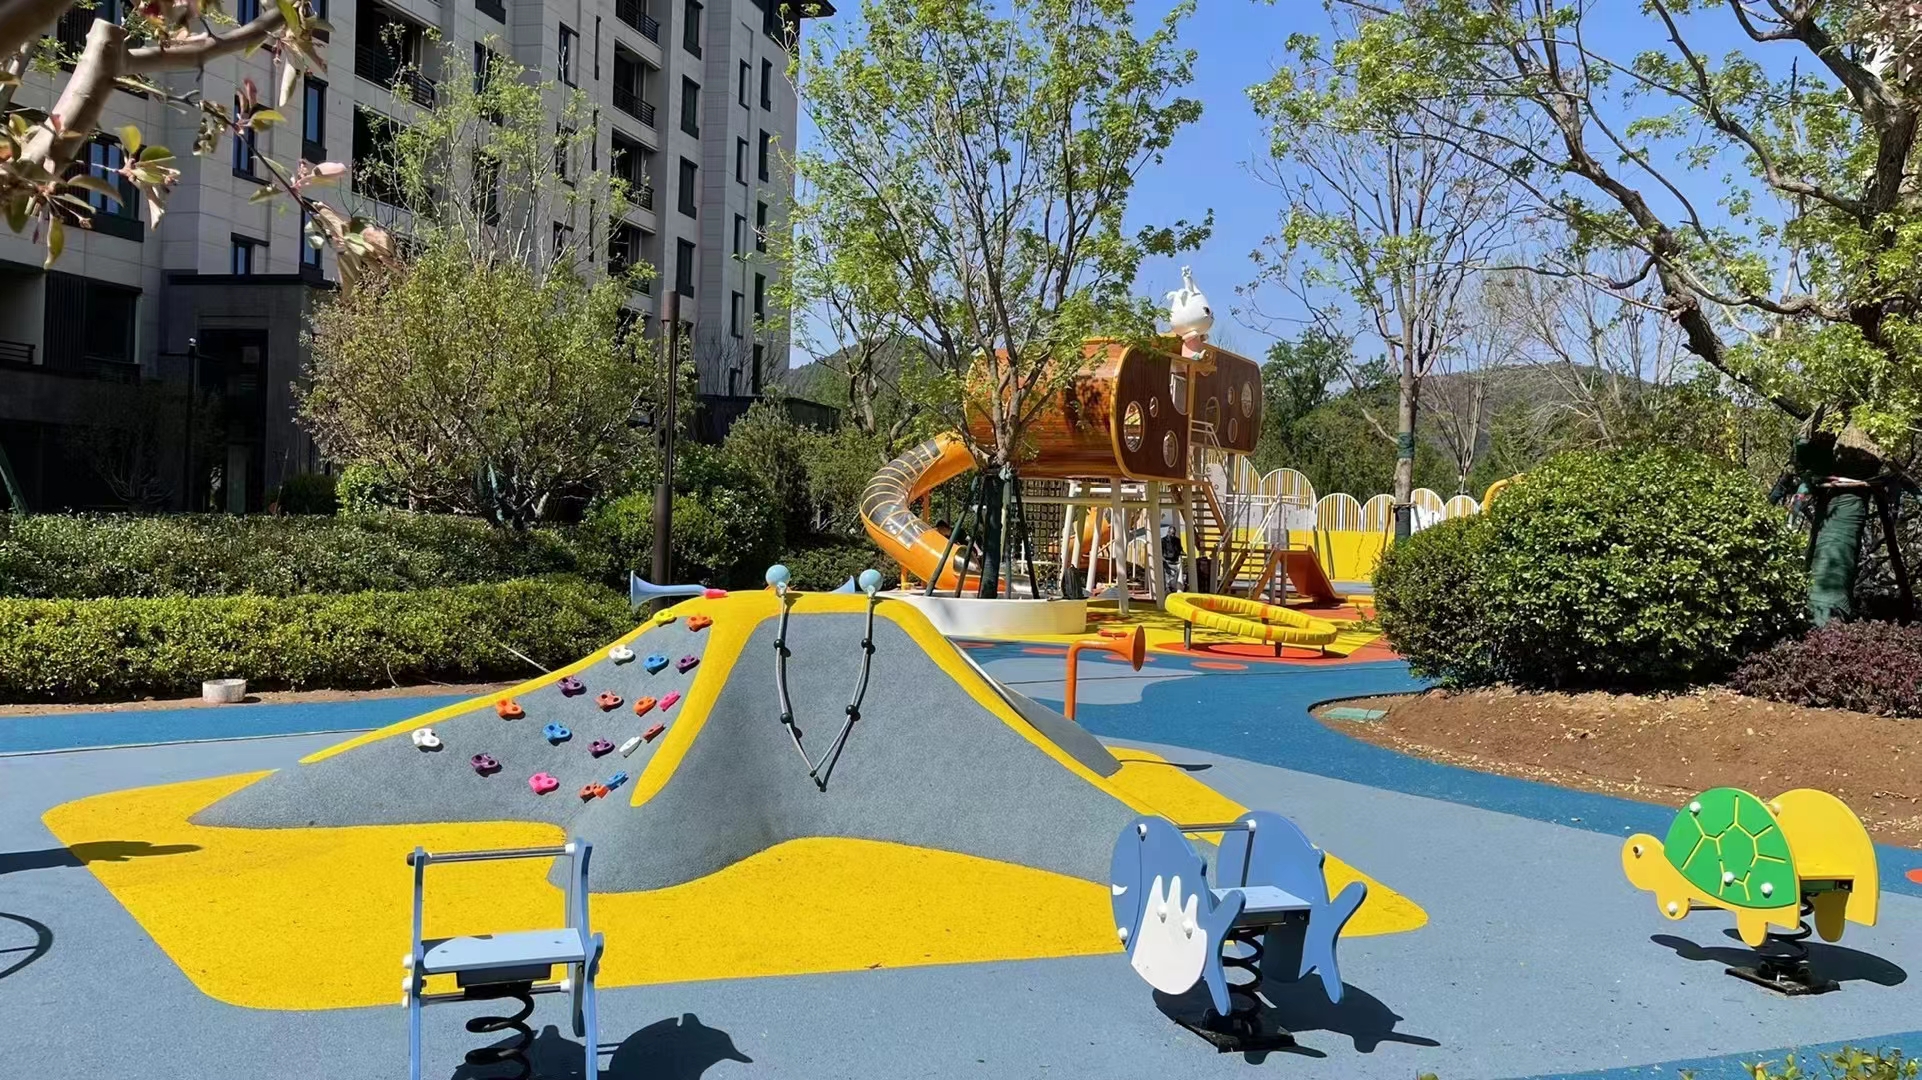 Creating Joyous Memories: A Look at the Real-World Impact of Outdoor Playground Equipment